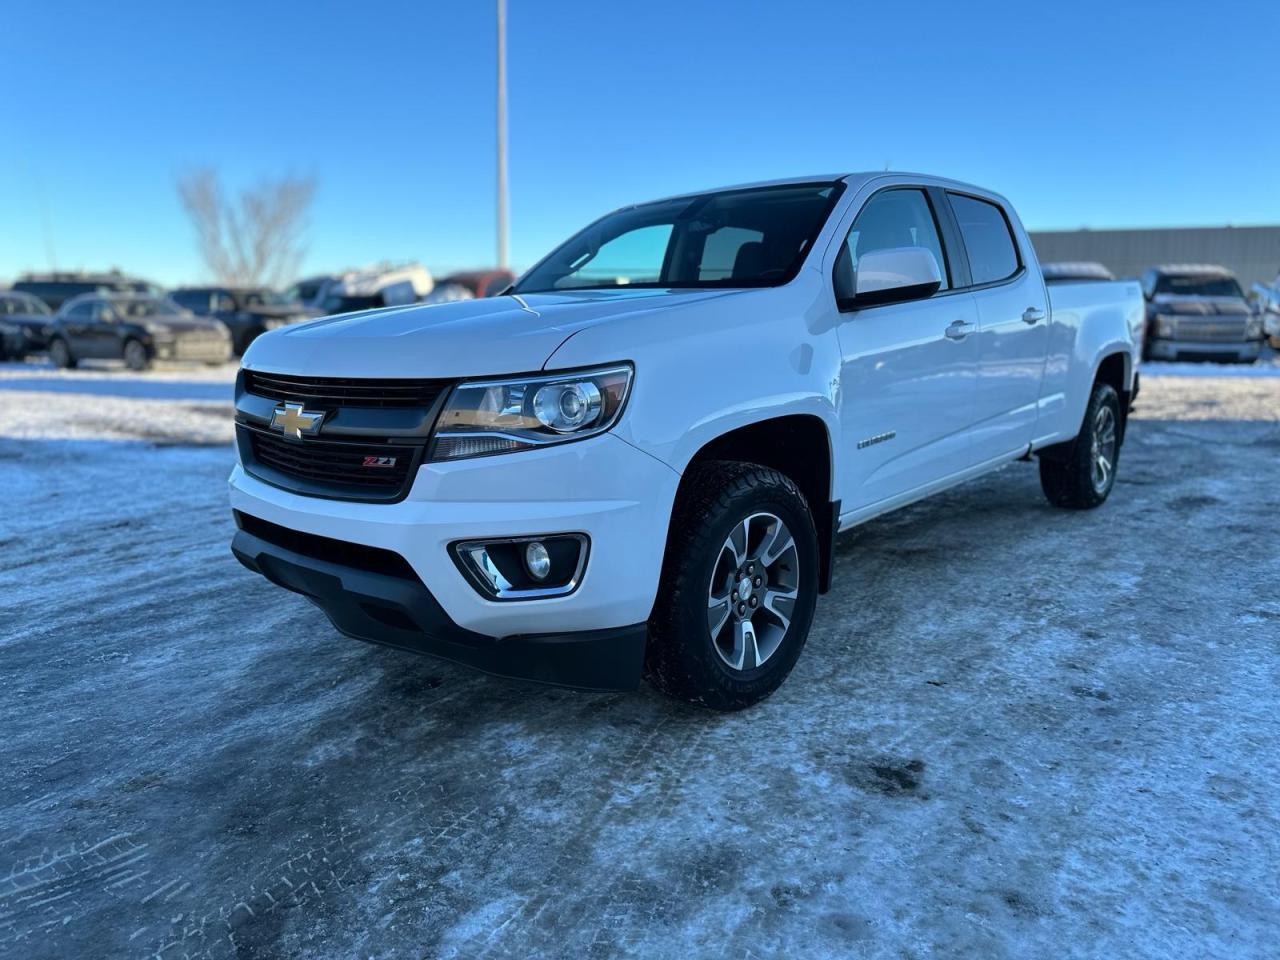 2019 Chevrolet Colorado Z71 4WD | WIRELESS CHARGER | LEATHER | $0 DOWN